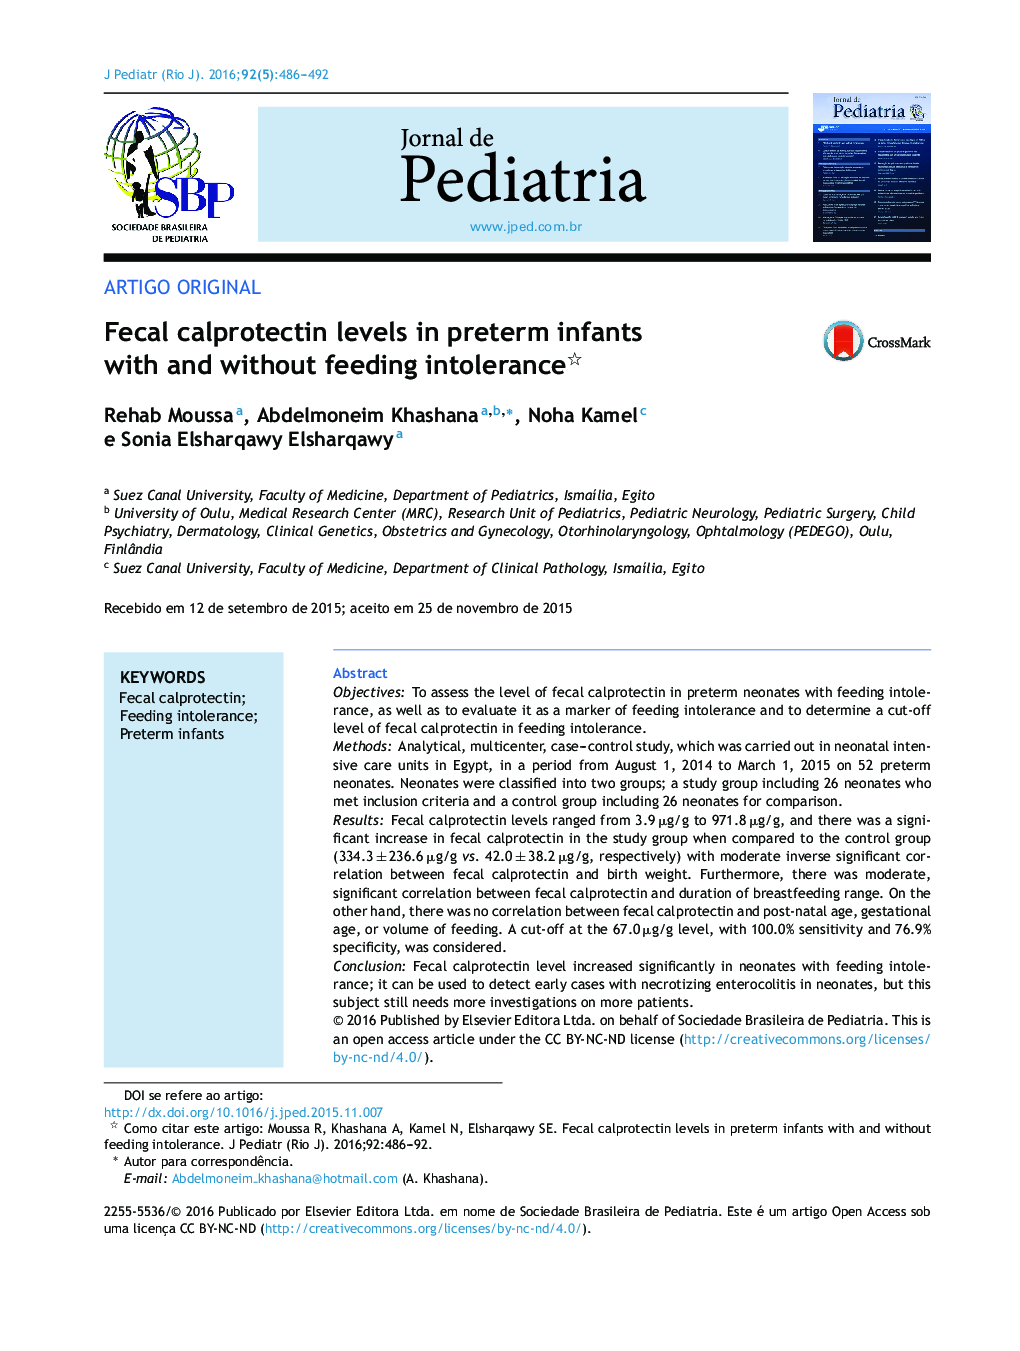 Fecal calprotectin levels in preterm infants with and without feeding intolerance 